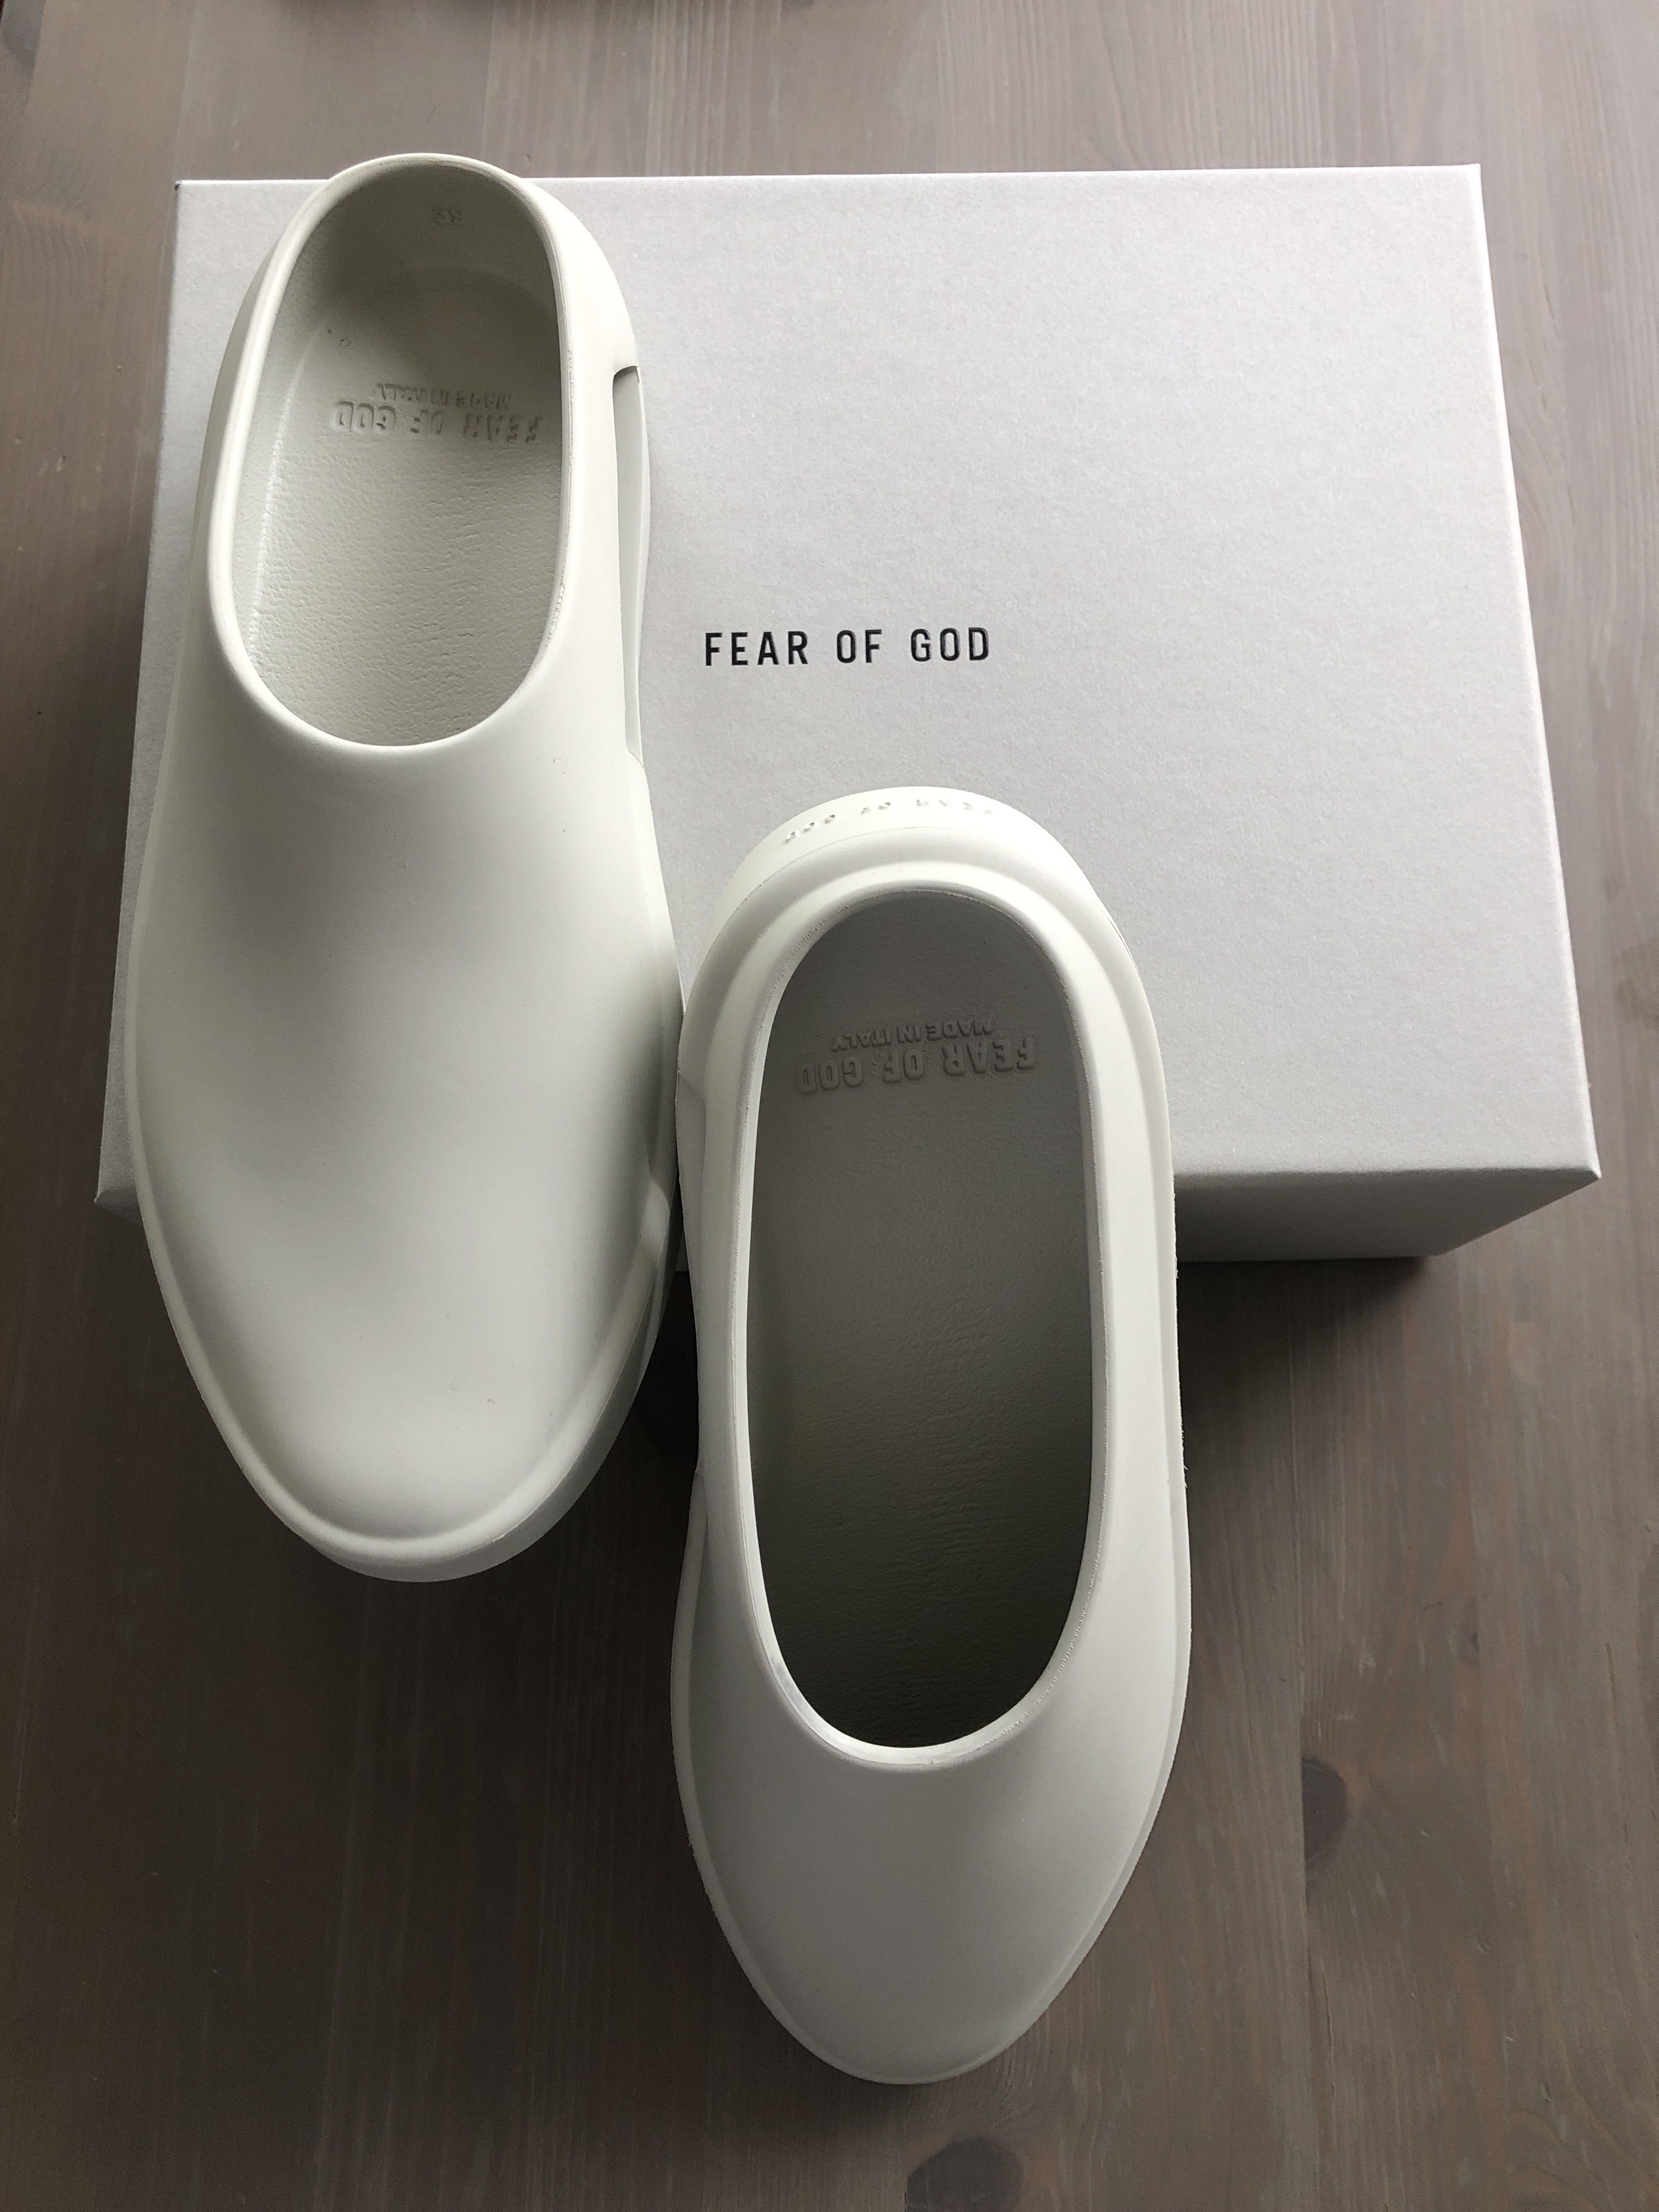 Fear of God - The California “Cement” Size 39 / US 7, Men's 